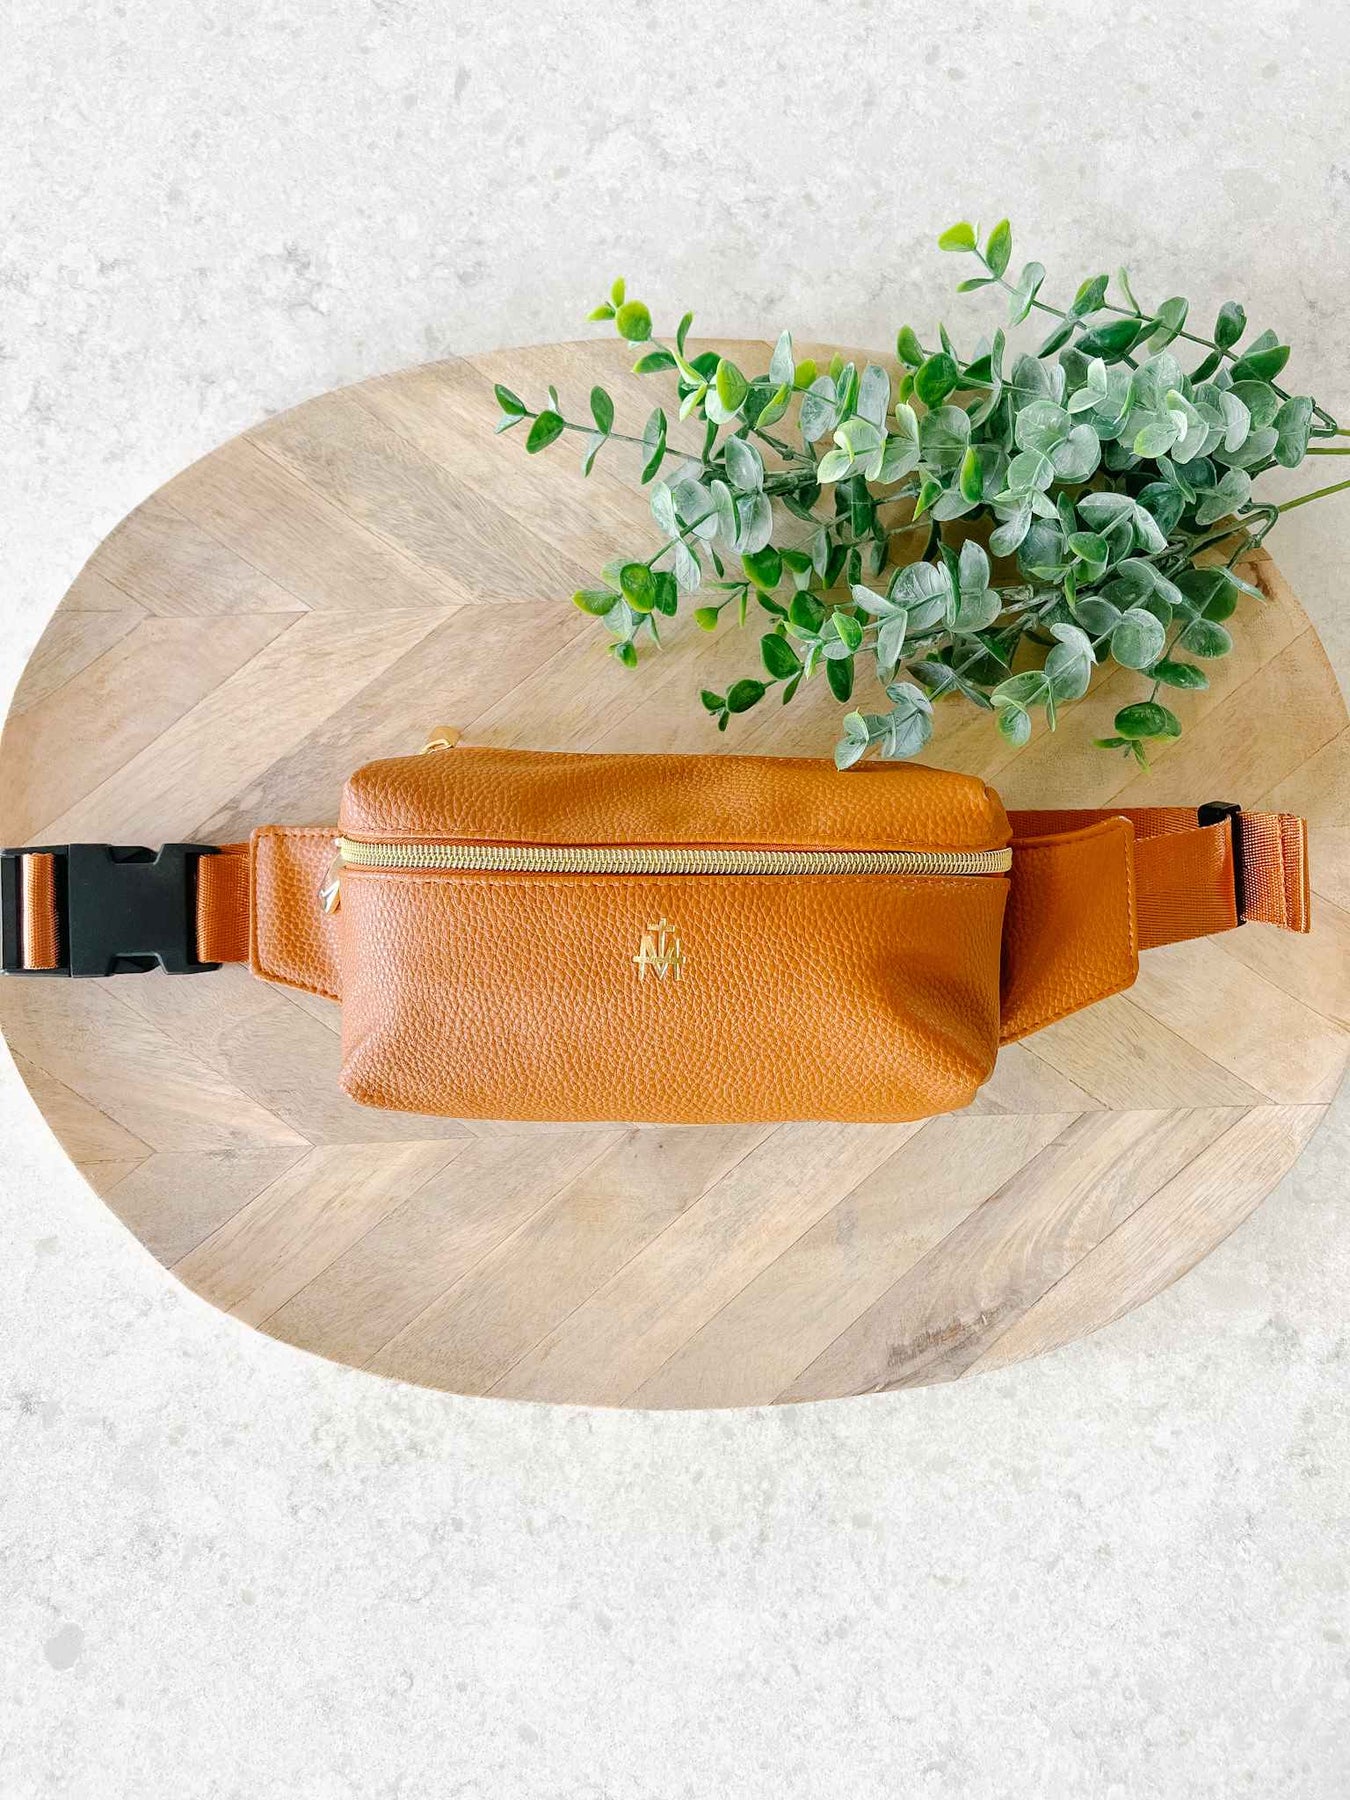 Be A Heart Our Lady Belt Bag